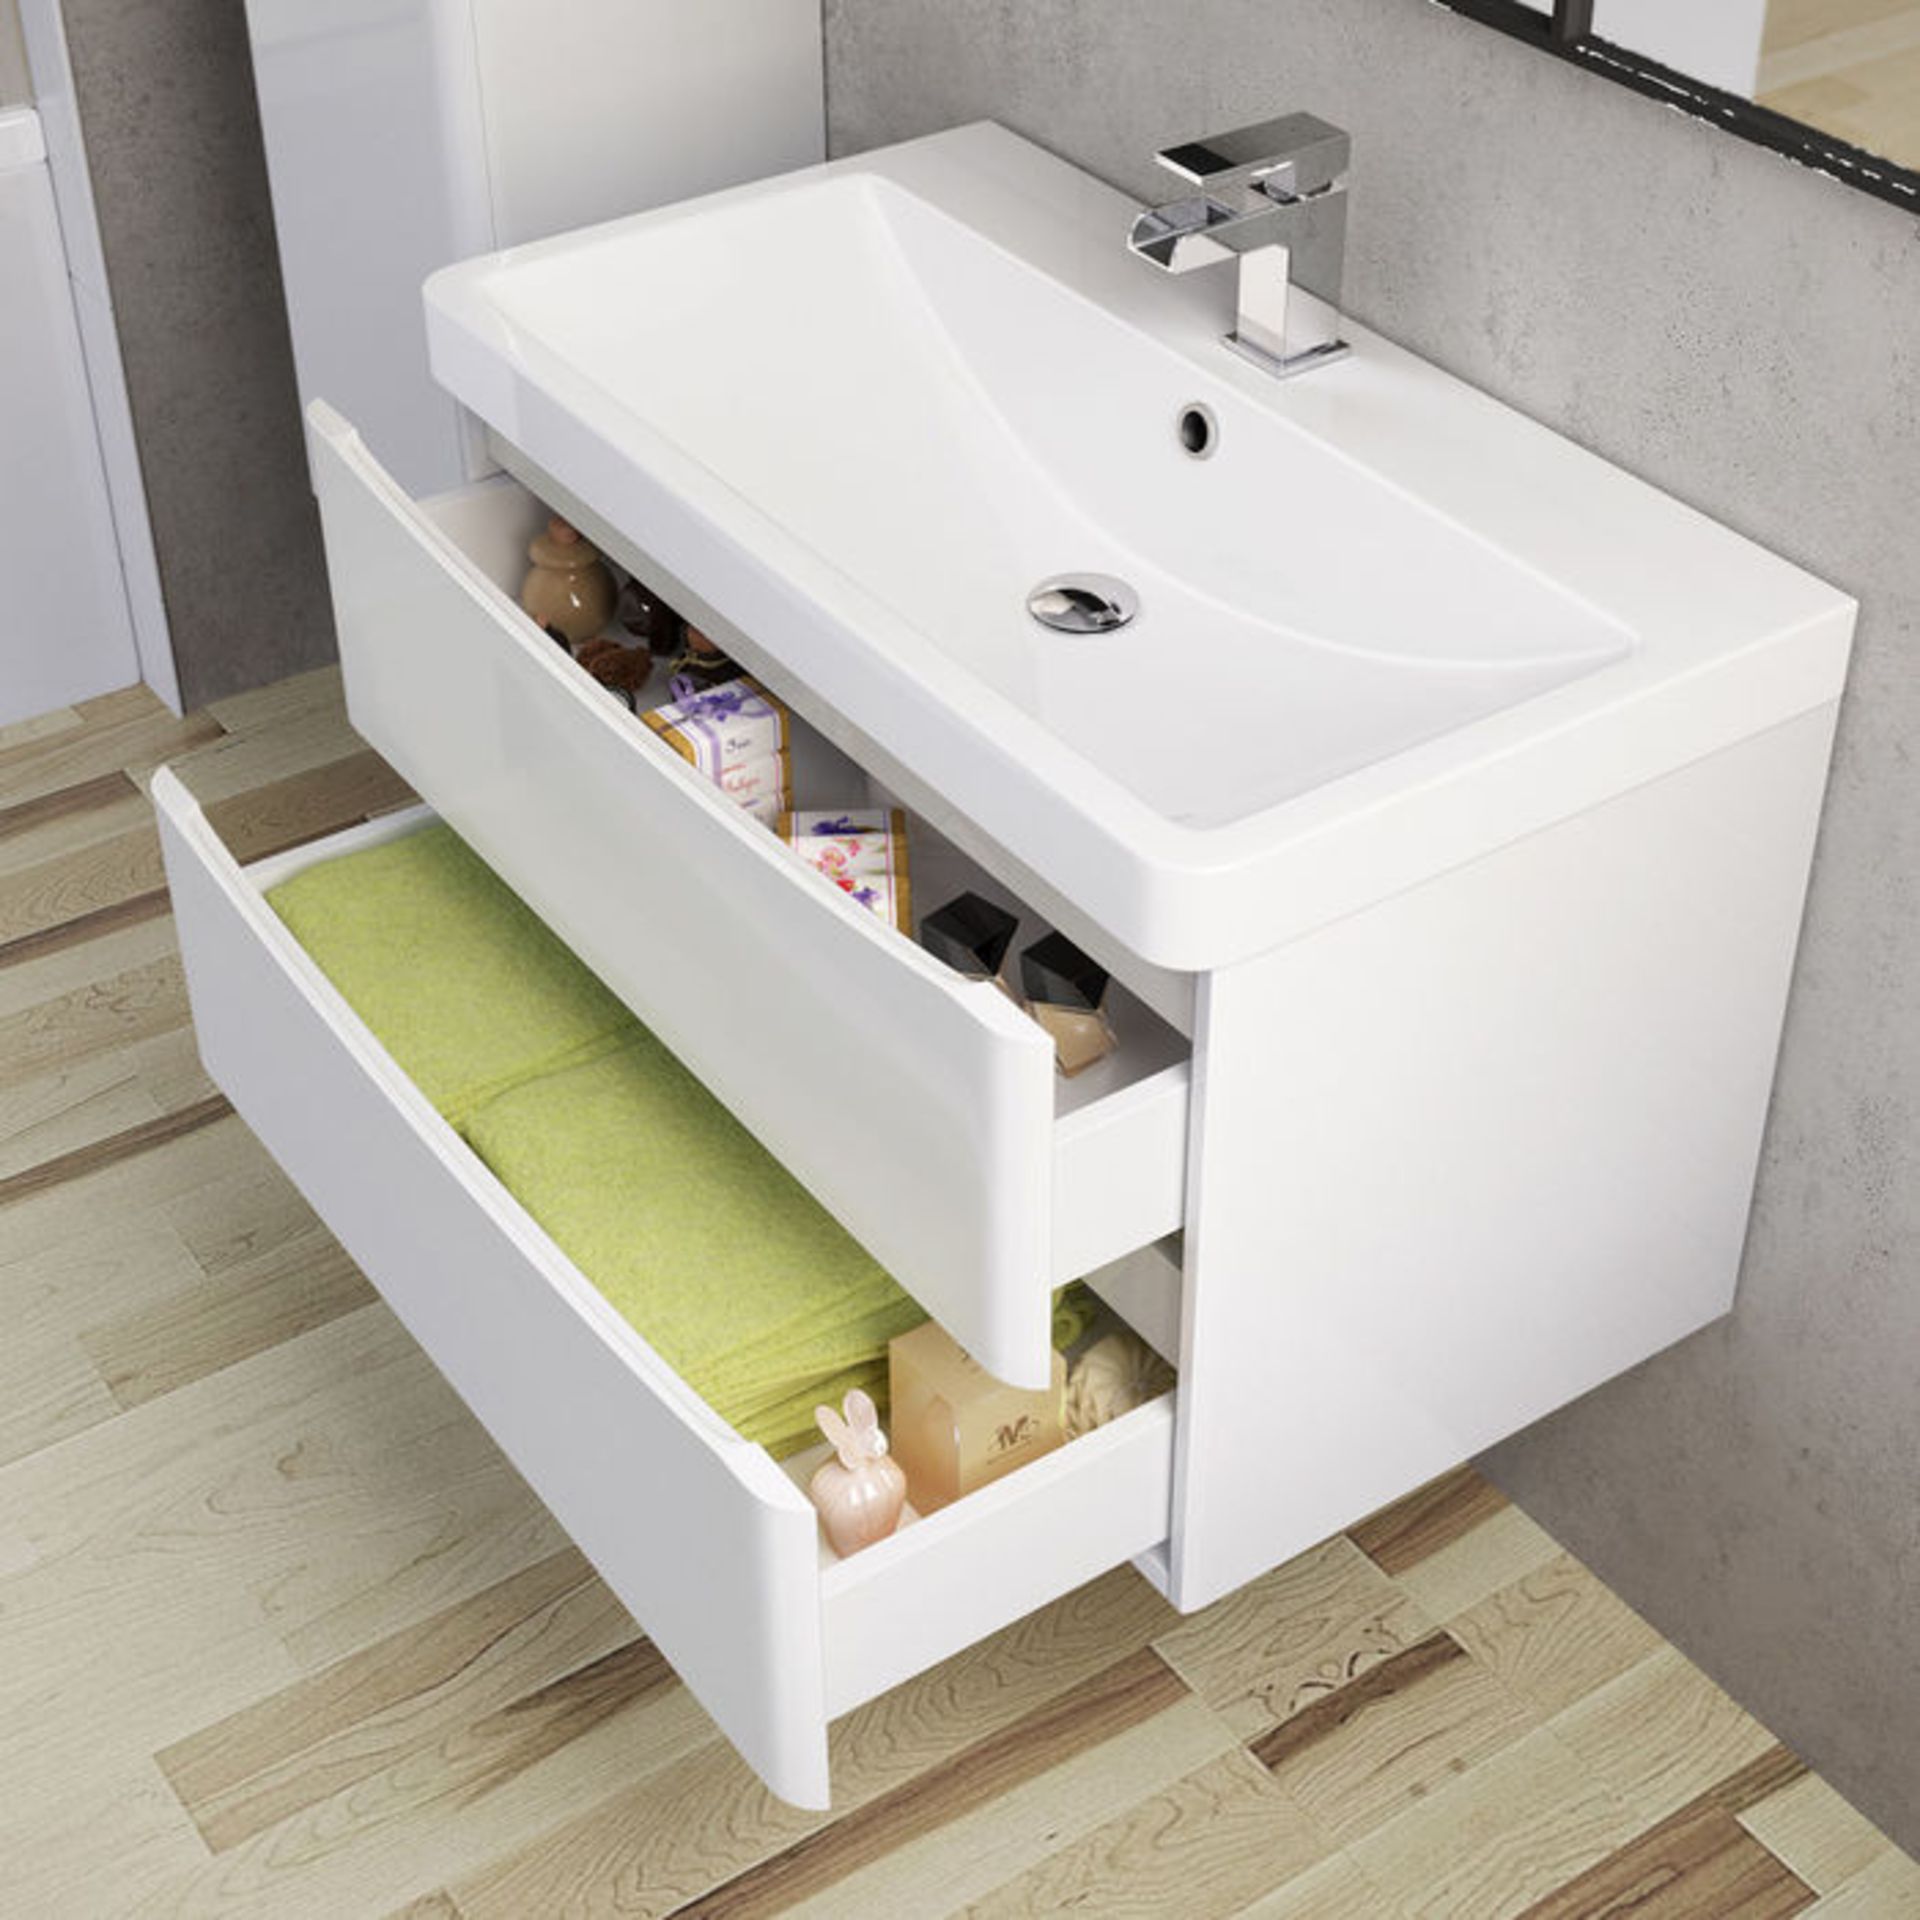 (UR23) 800mm Austin II Gloss White Built In Basin Drawer Unit - Wall Hung. RRP £699.99. COMES ... - Image 2 of 4